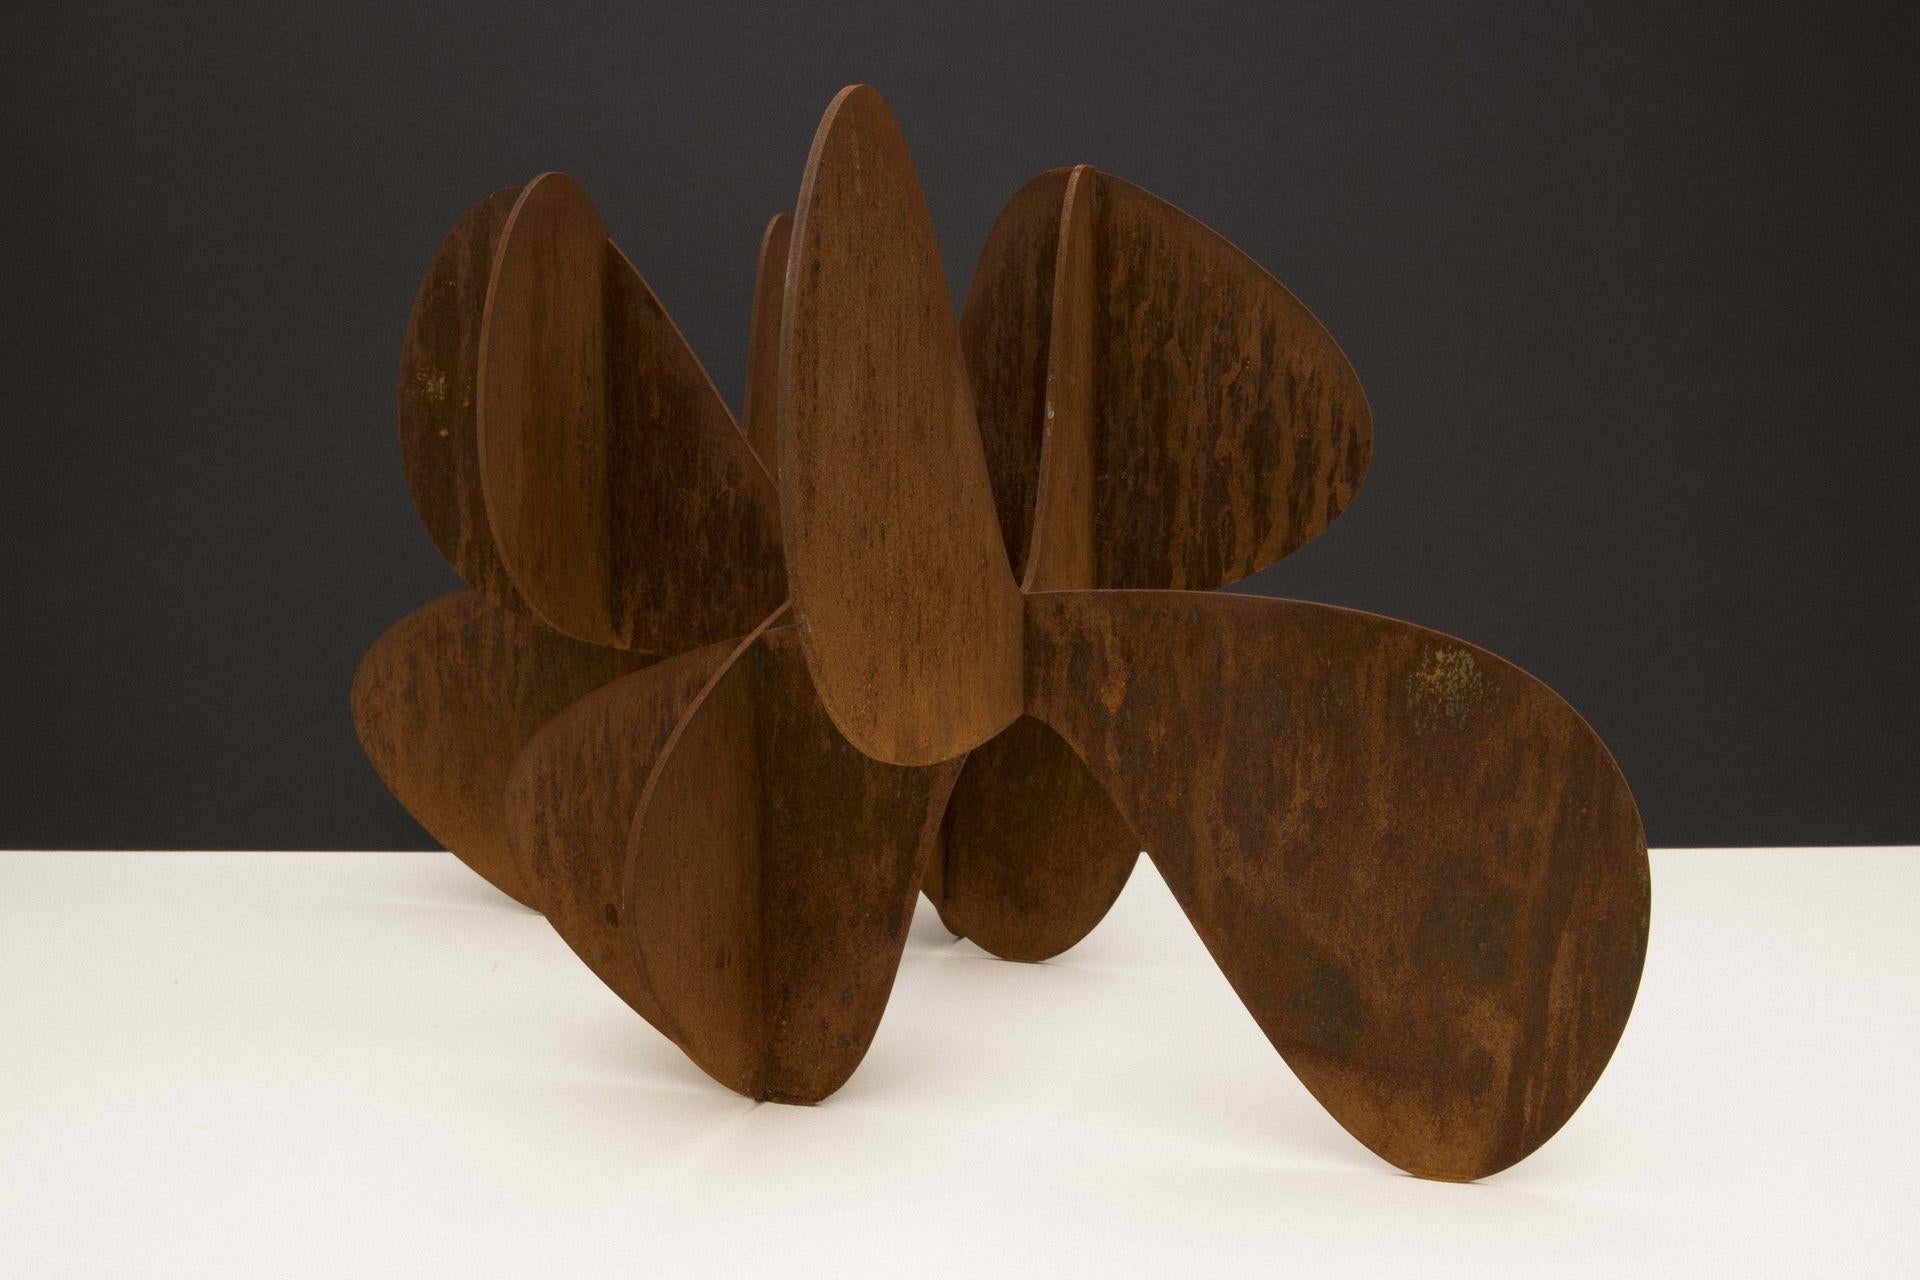 Barricada #1 ac S, weathering steel sculpture by contemporary Venezuelan artist Alejandro Vega Beuvrin. 
Limited edition of 5 + 3 A.P.
In a minimalists’ style and influenced by his architectural knowledge, the artist views his works in relation to